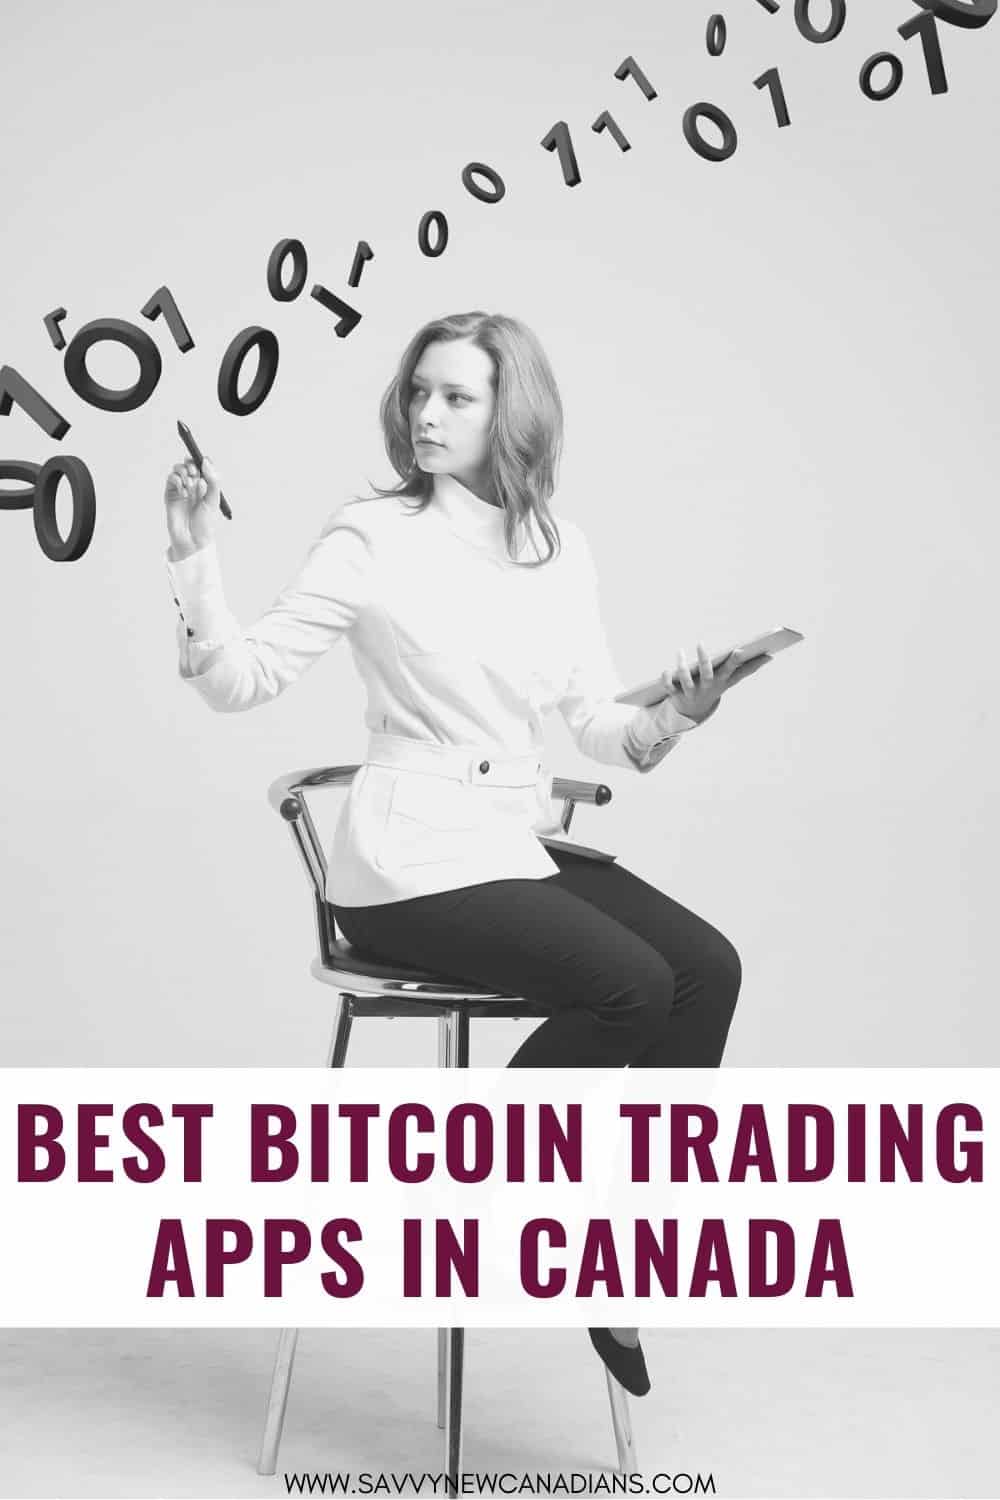 Best Bitcoin Trading Apps and Platforms in Canada Jul 2022